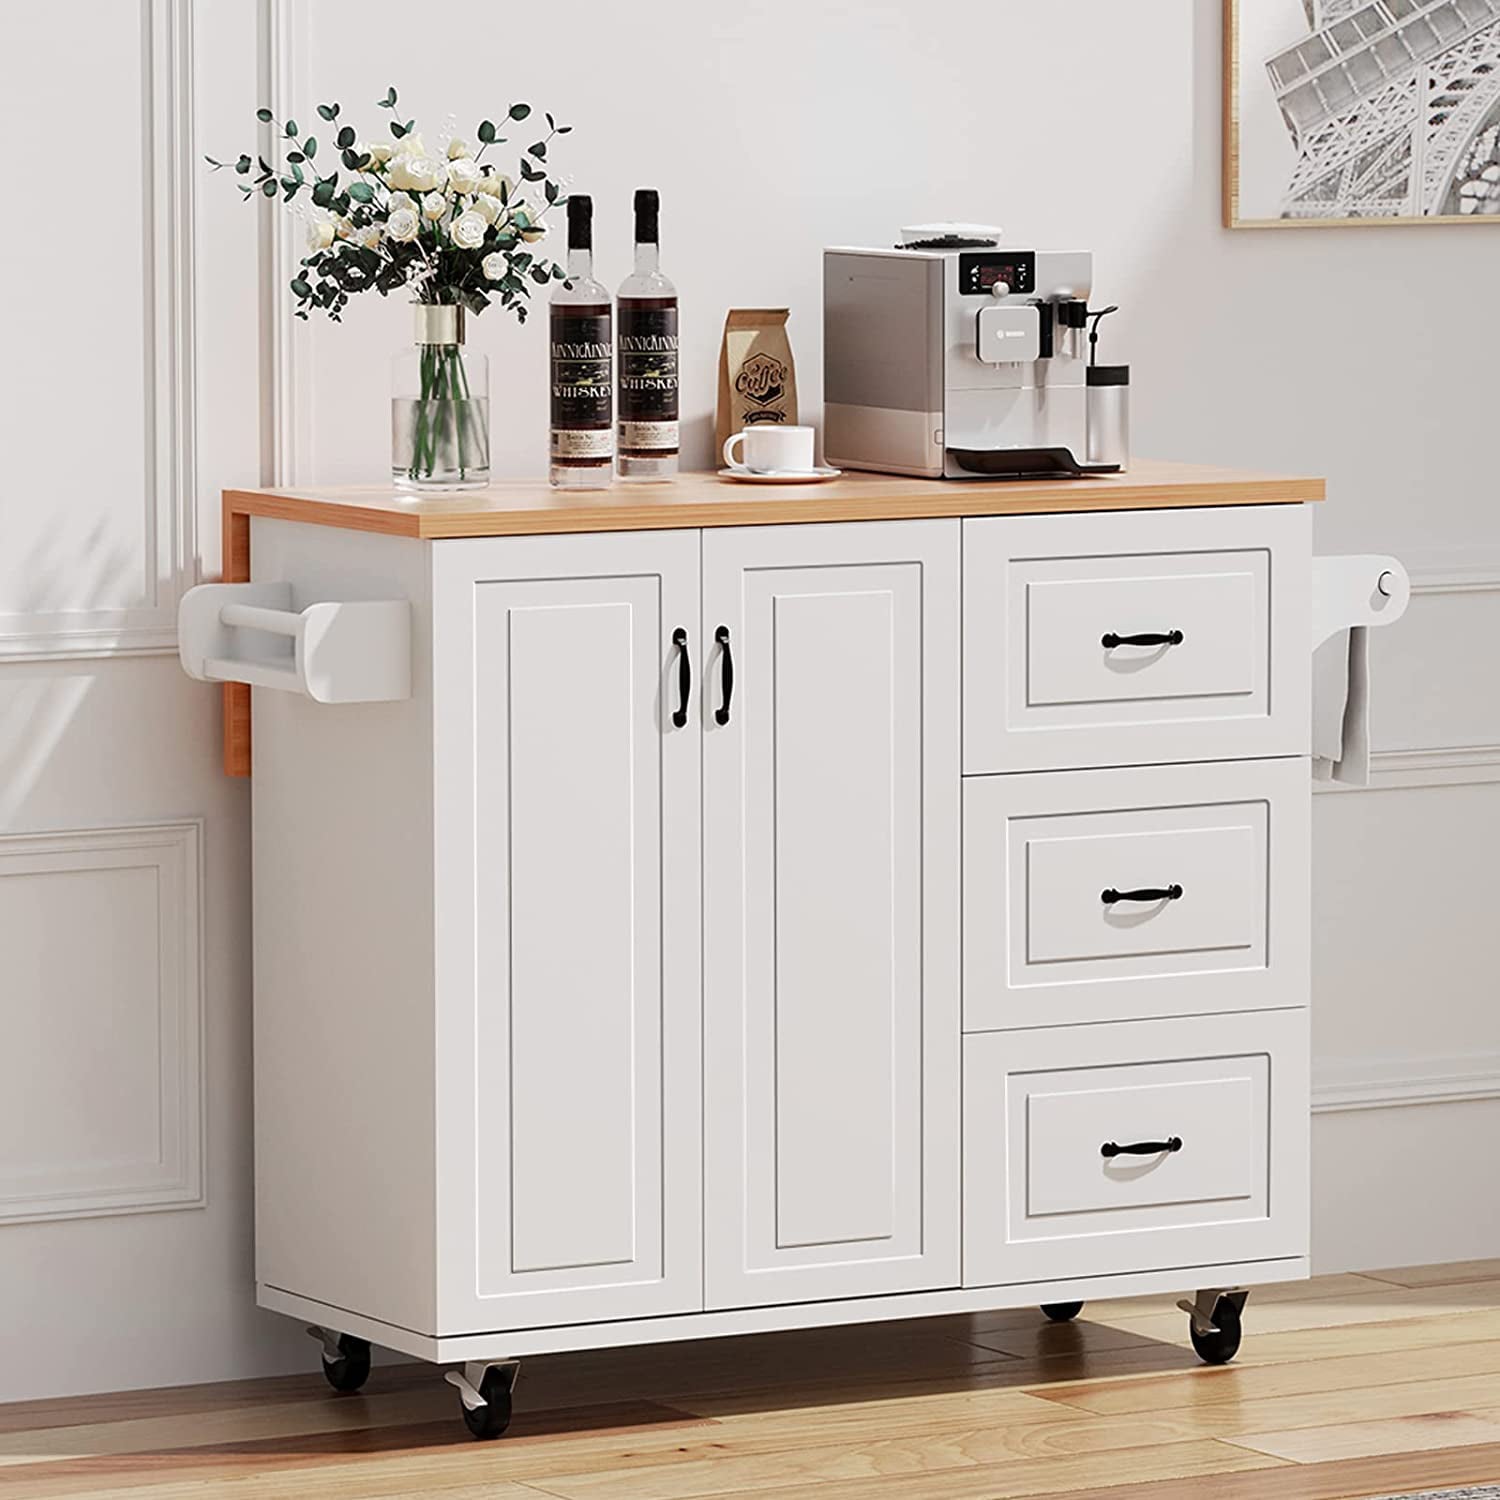 Catrimown Kitchen Island  Cart with Storage， Drop Leaf Kitchen Island on Wheels， Wood Countertop， Lockable Casters， White